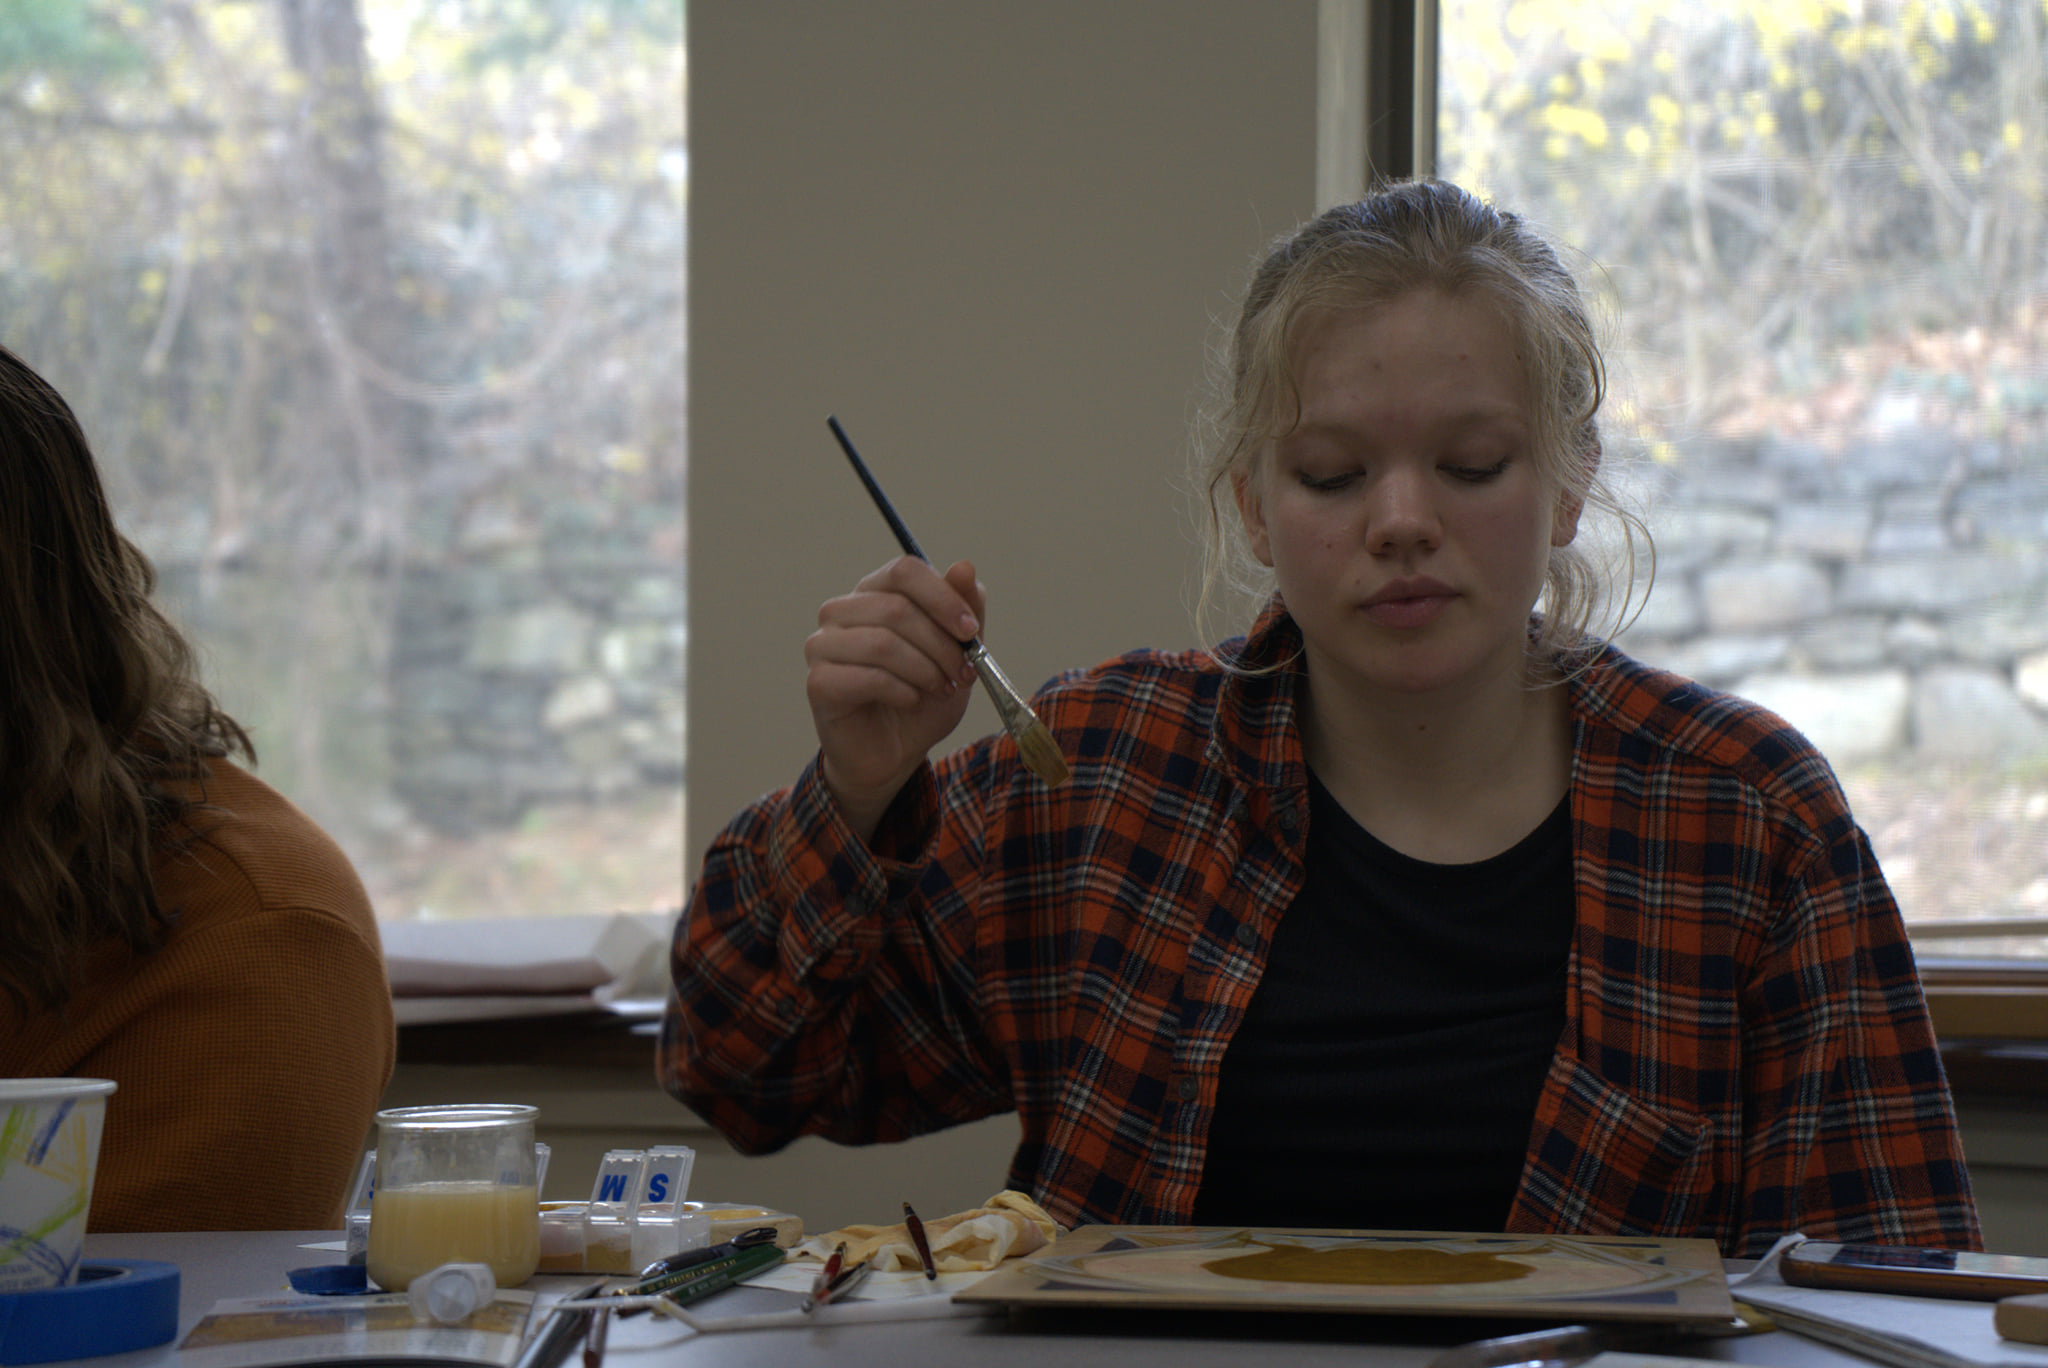 Workshop student holds up a brush as she examines her icon-in-progress